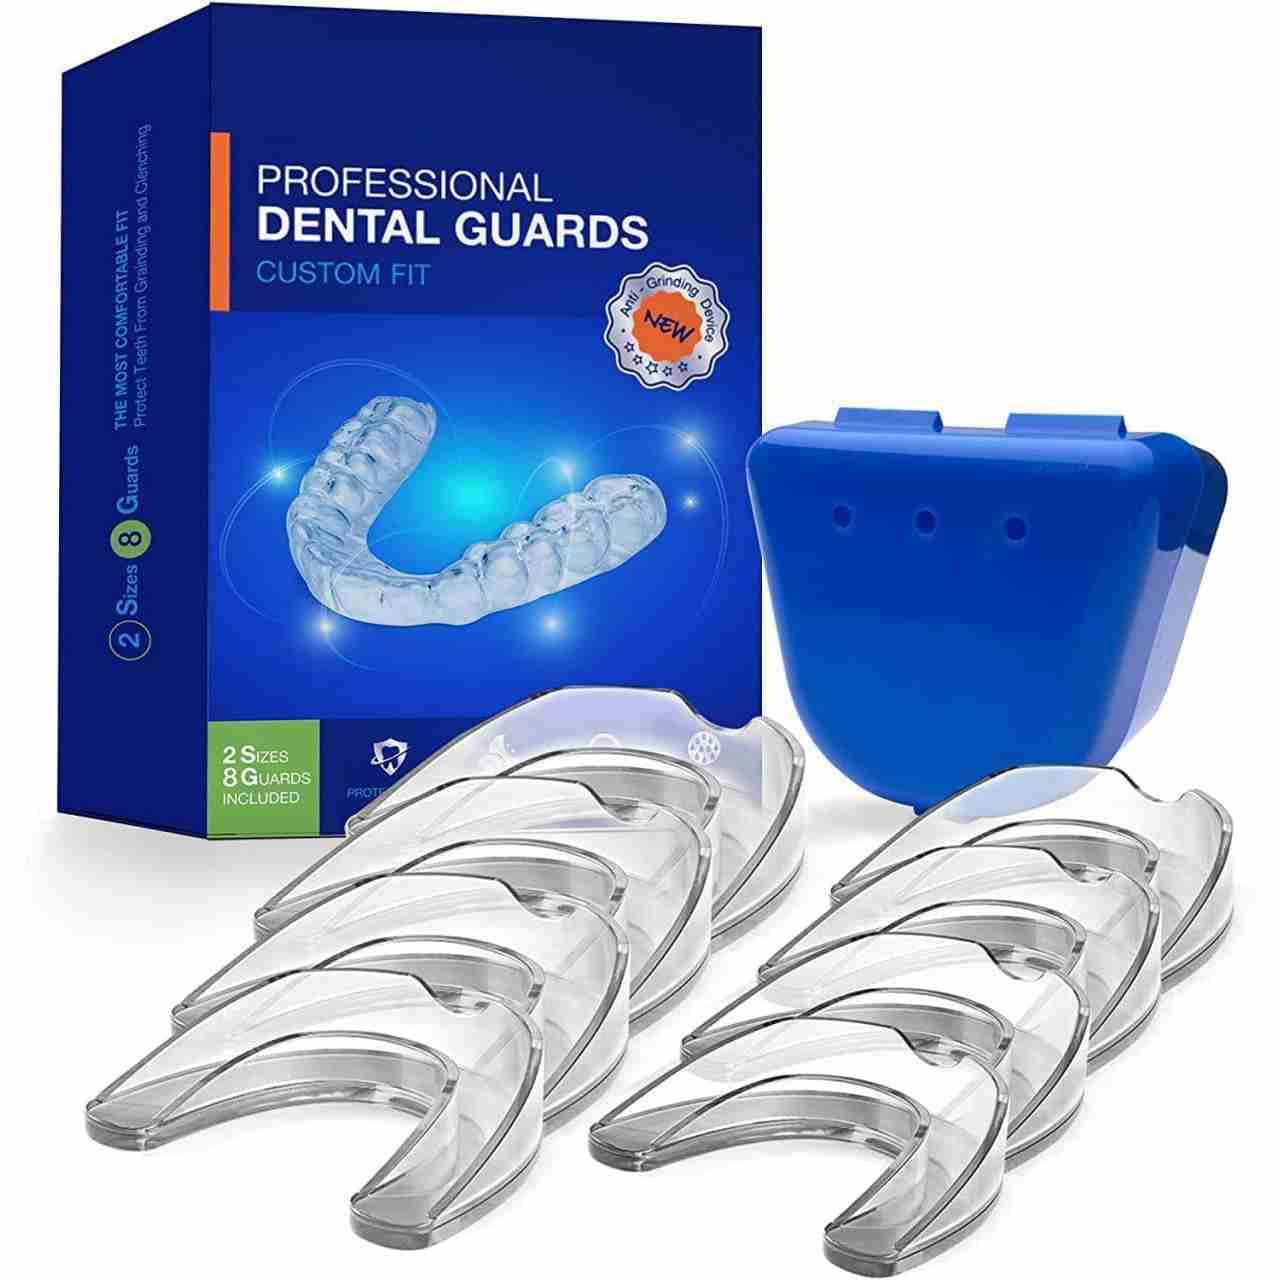 mouth-guard-for-grinding-teeth-new-mouth-guard-for-cleaning with cash back rebate